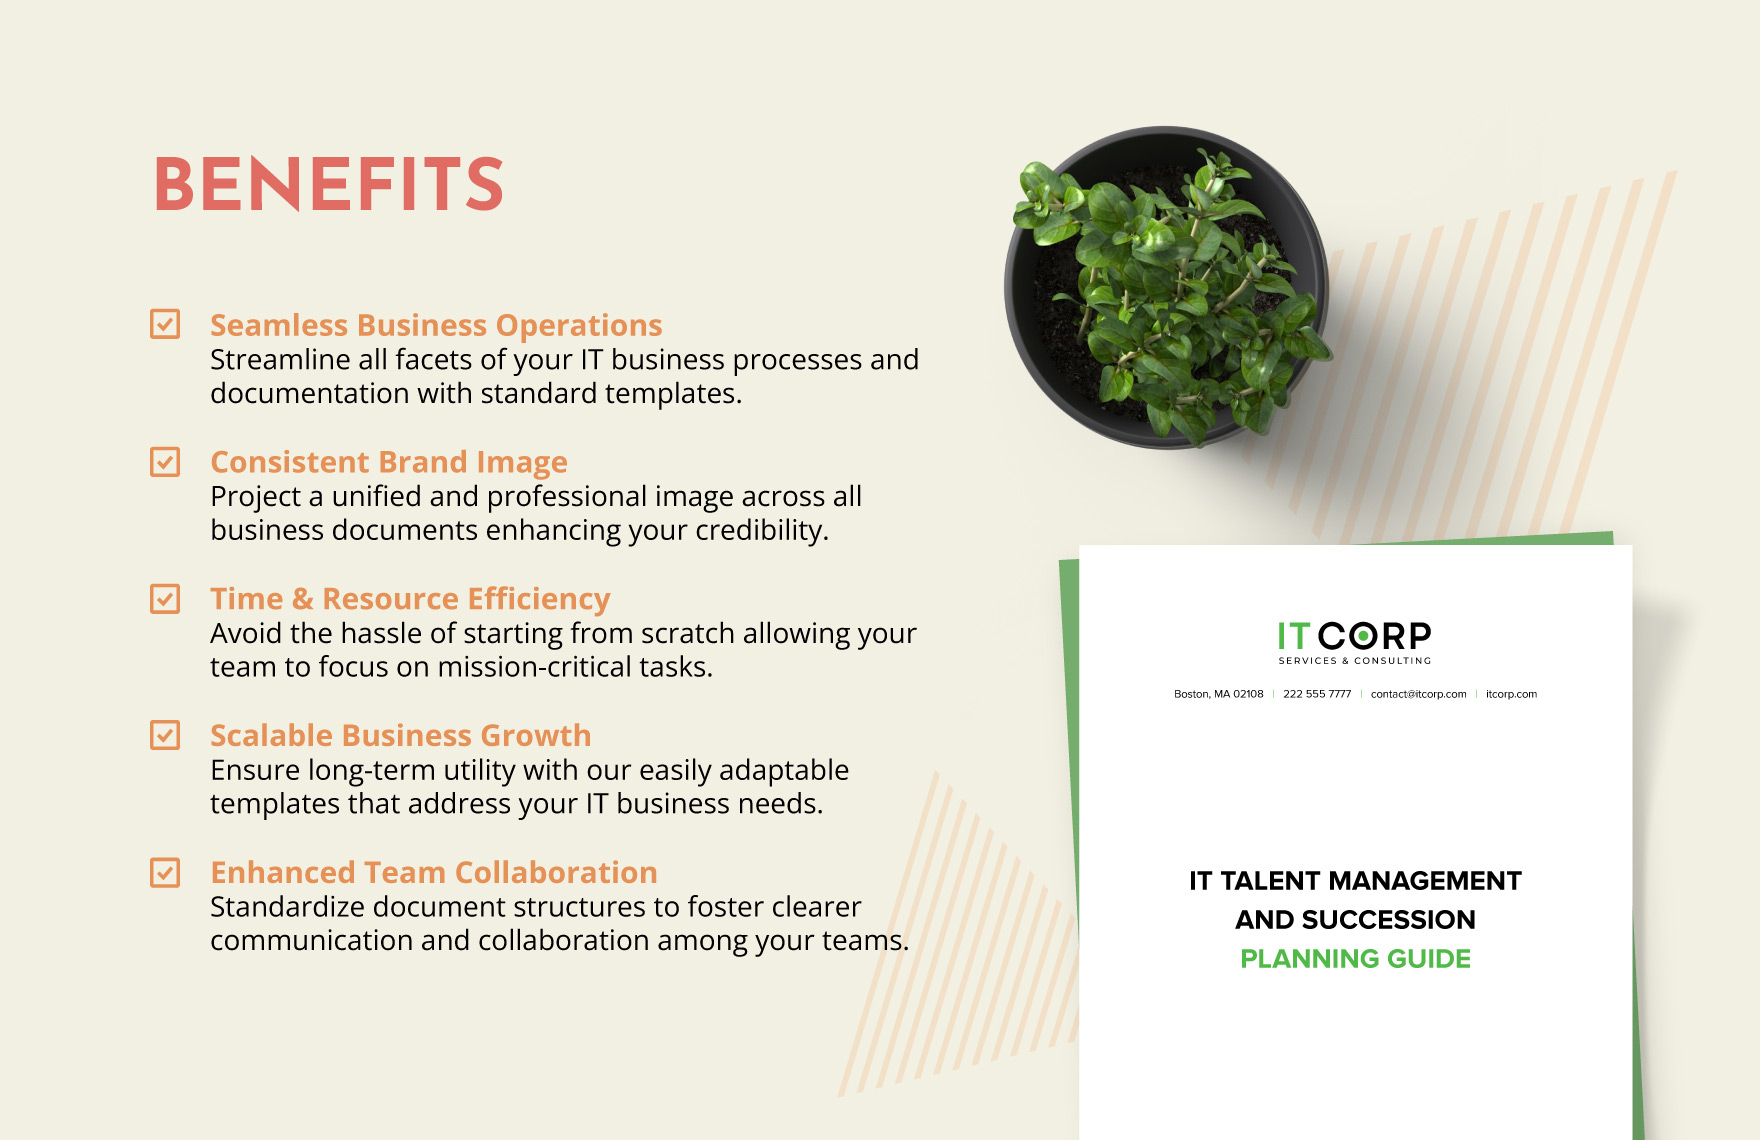 IT Talent Management and Succession Planning Guide Template